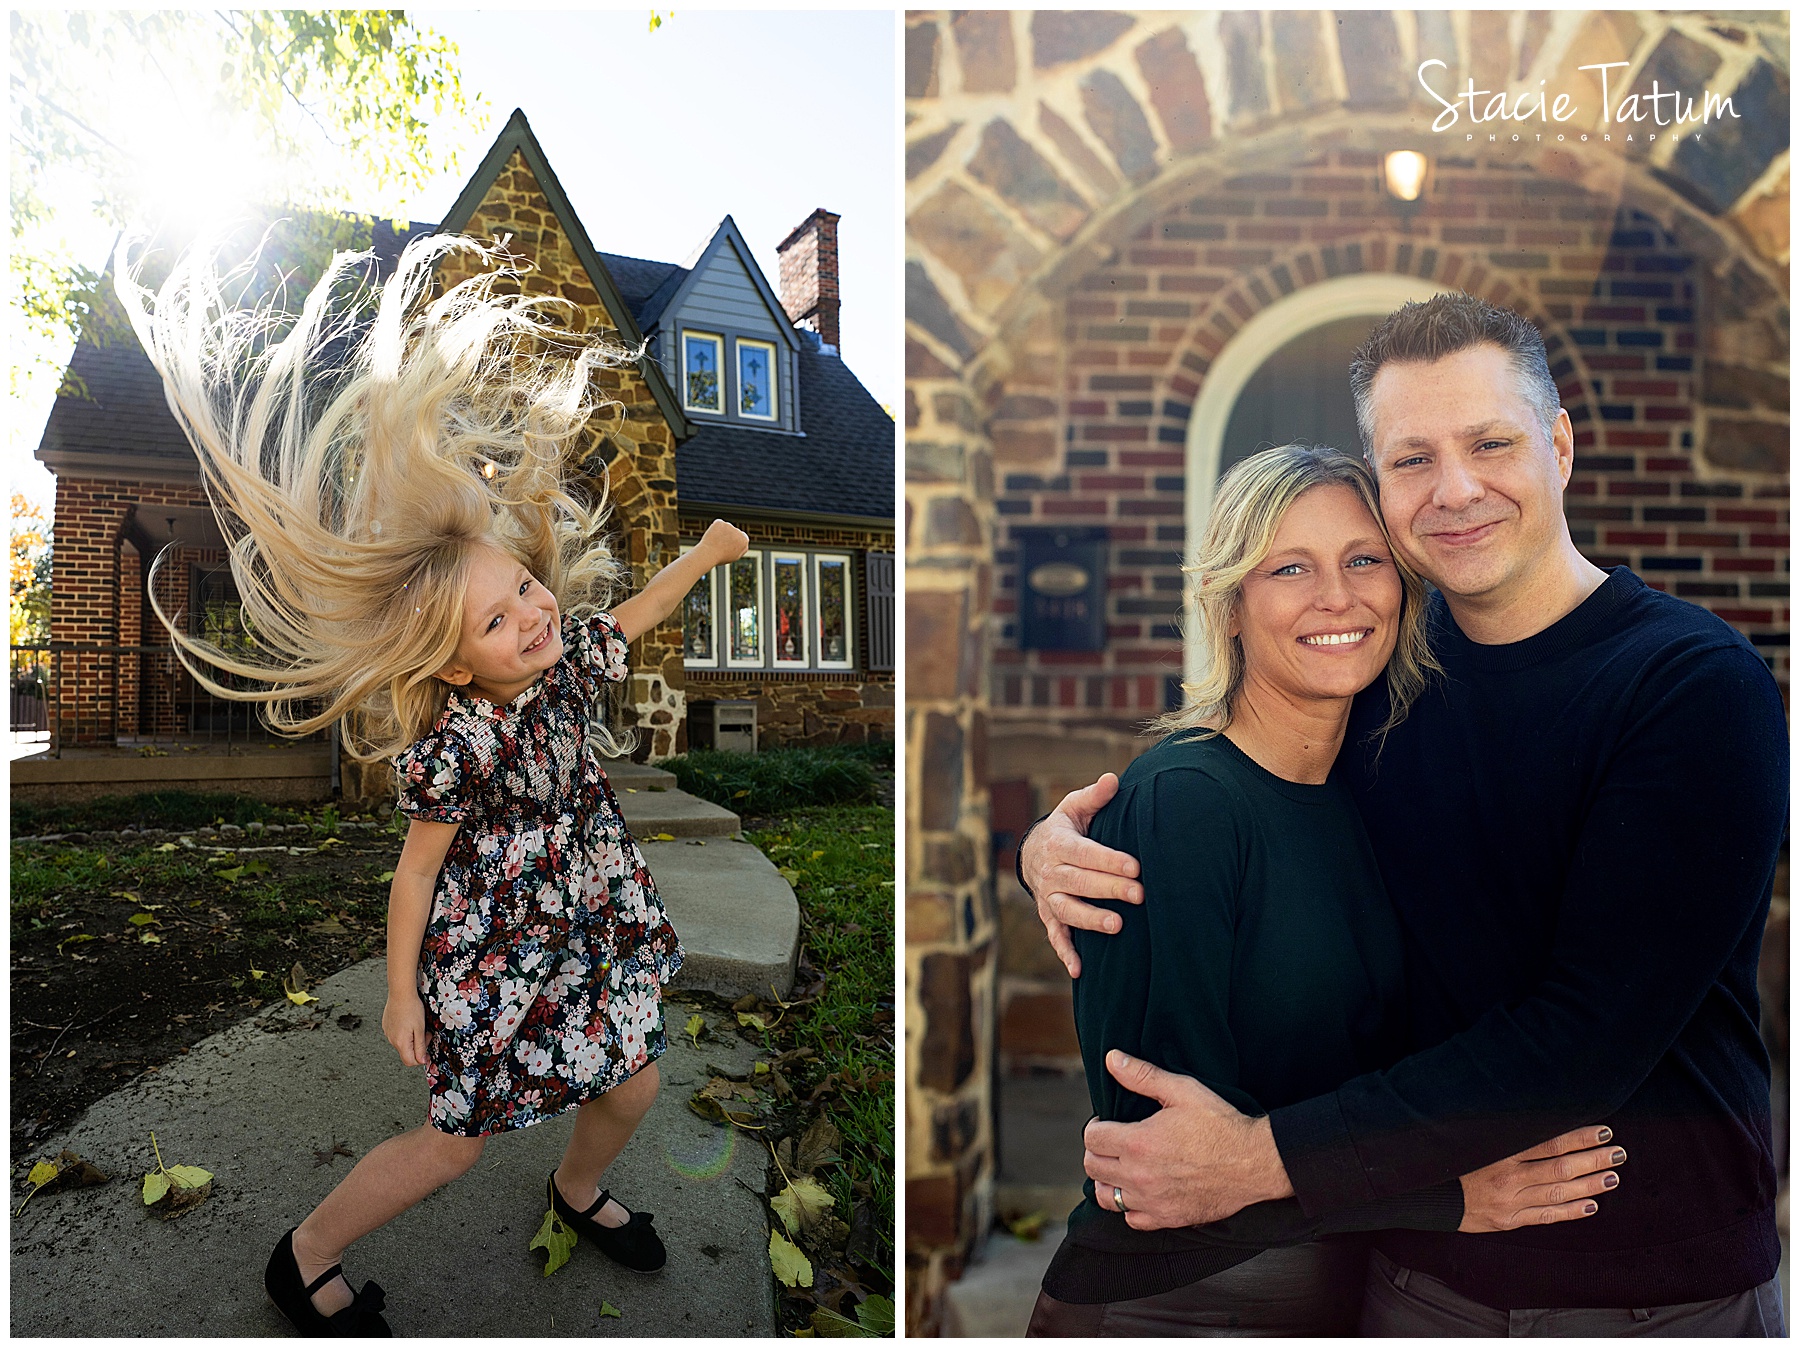 Dallas photography family session at home in front yard.jpg